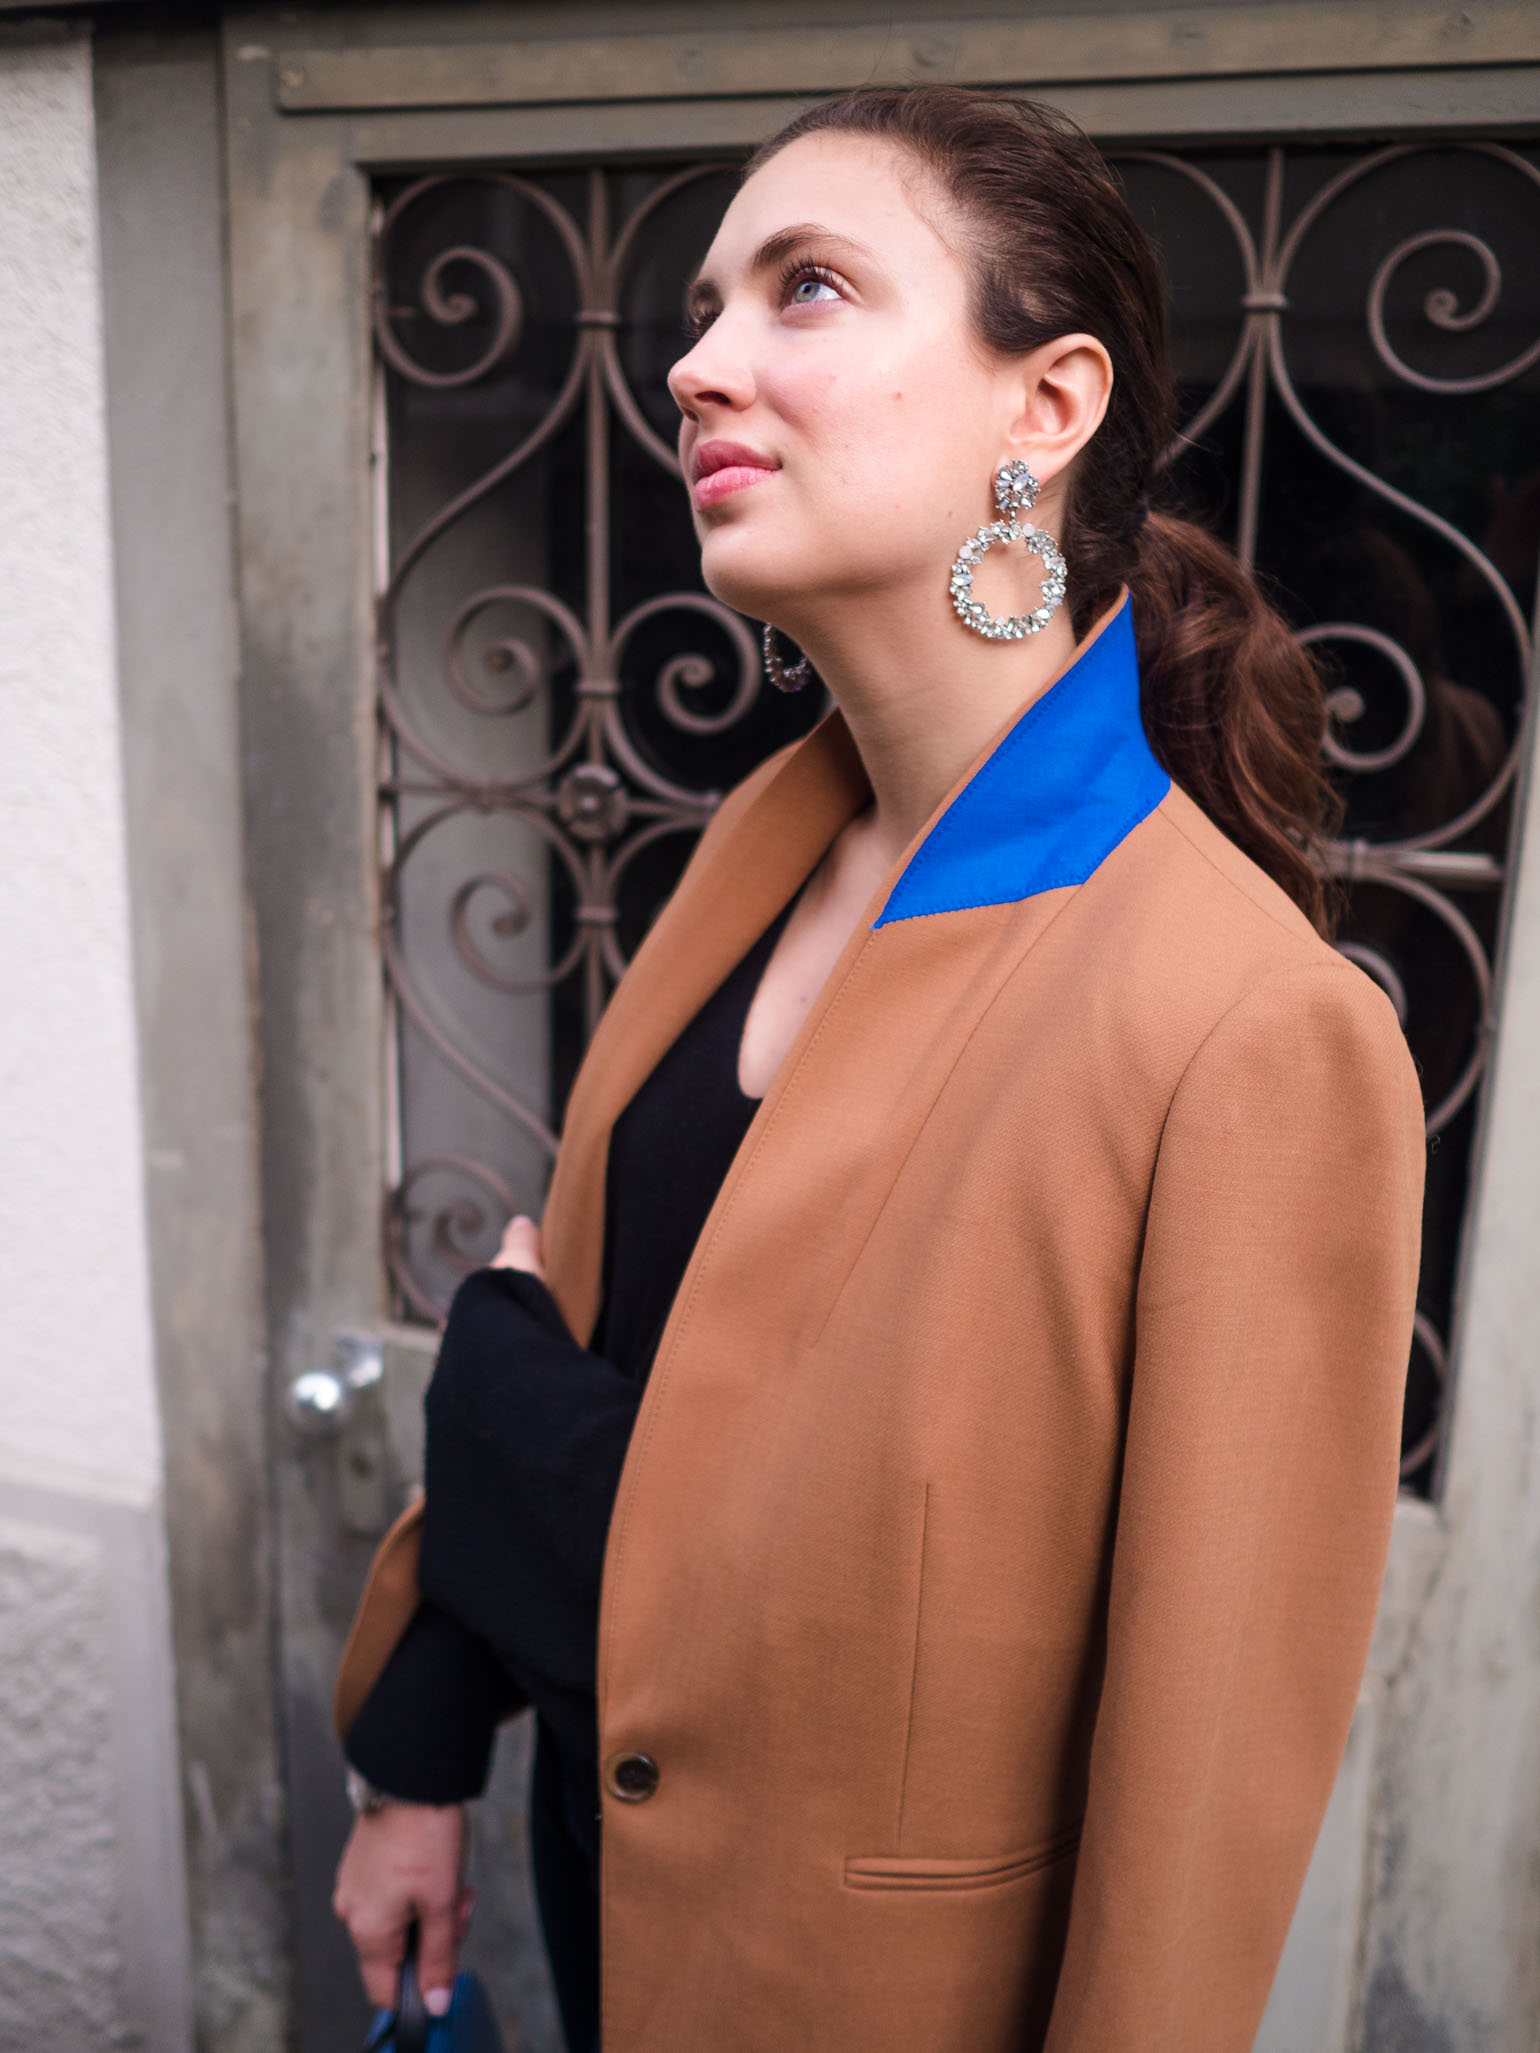 Cristina from The Brunette Nomad, Dallas and Swiss based fashion blogger, shares how to look instantly chic this season with a J.Crew camel blazer